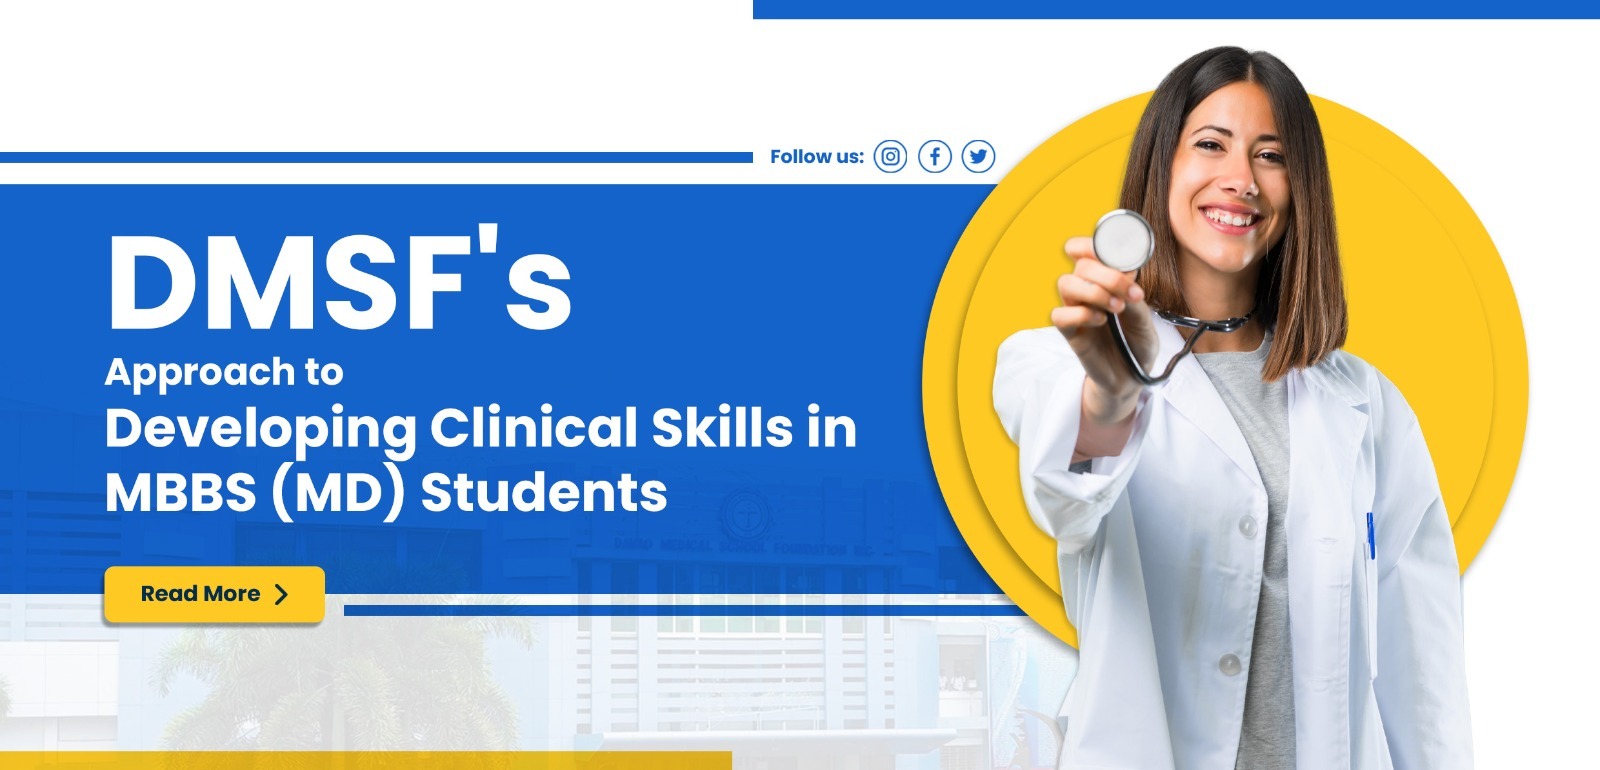 DMSF's Approach to Developing Clinical Skills in MBBS (MD) Students